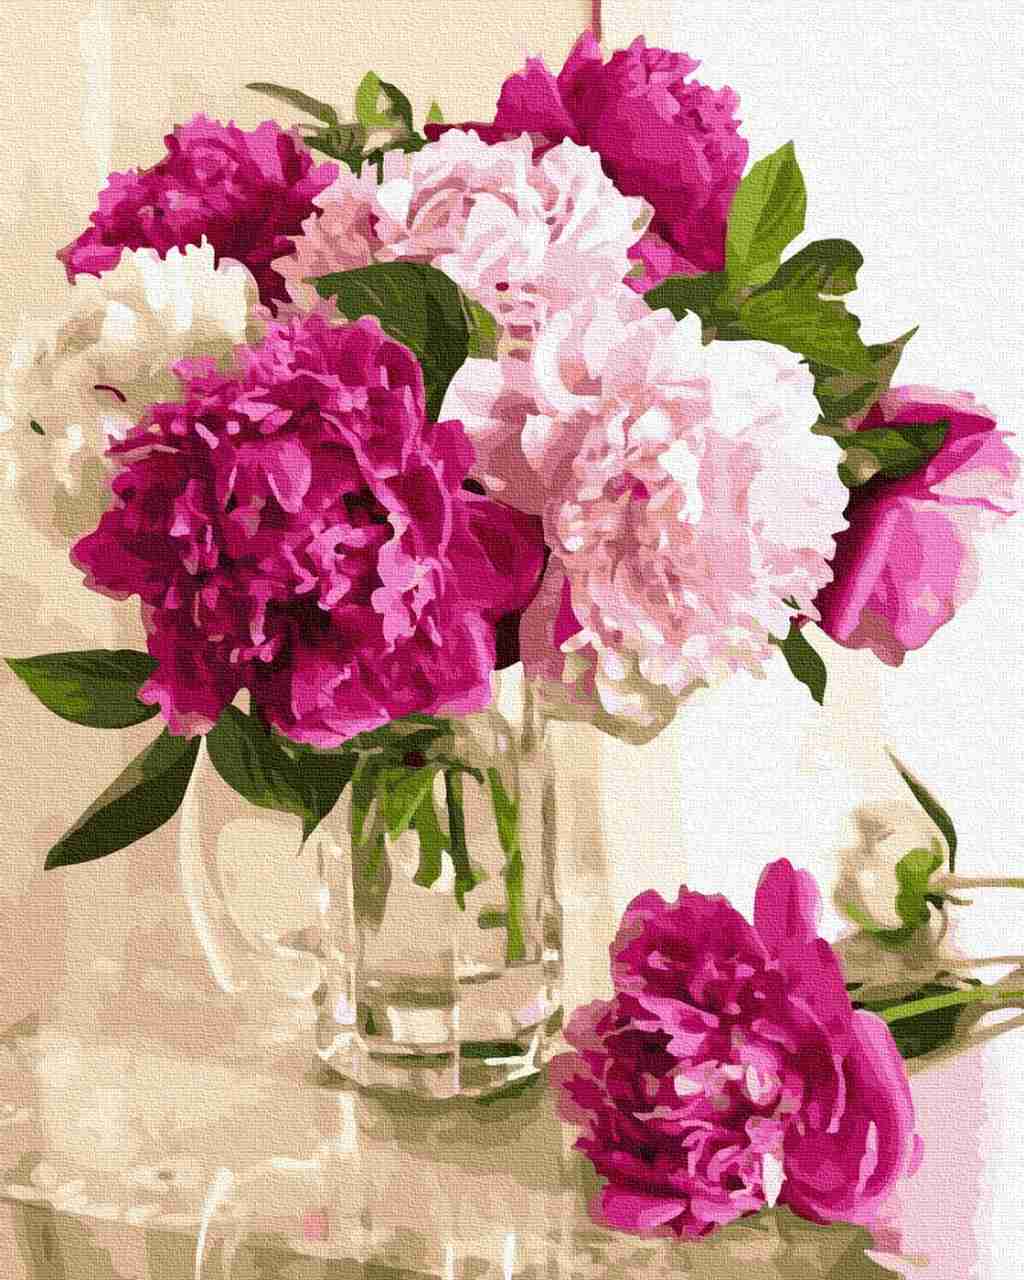 Peonies in Vase (wallpaper background)  Paint-by-Number Kit for Adults —  Elle Crée (she creates)